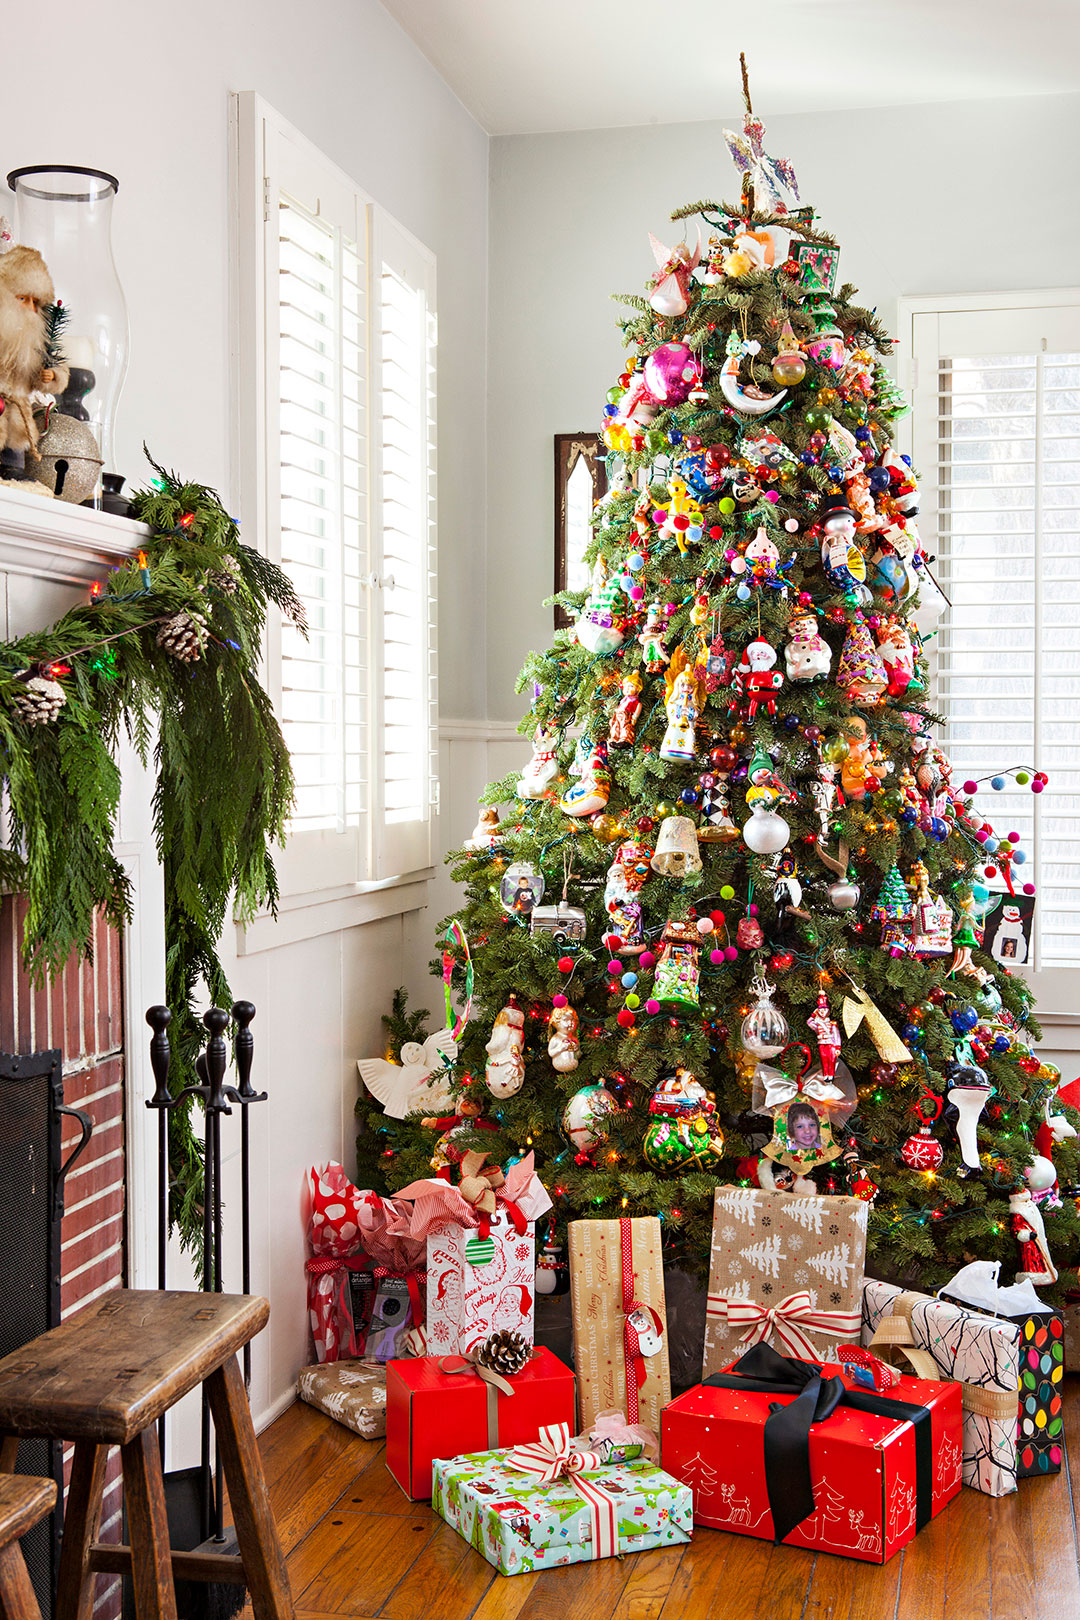 How to Choose and Decorate Your Christmas Tree - Cottage sty